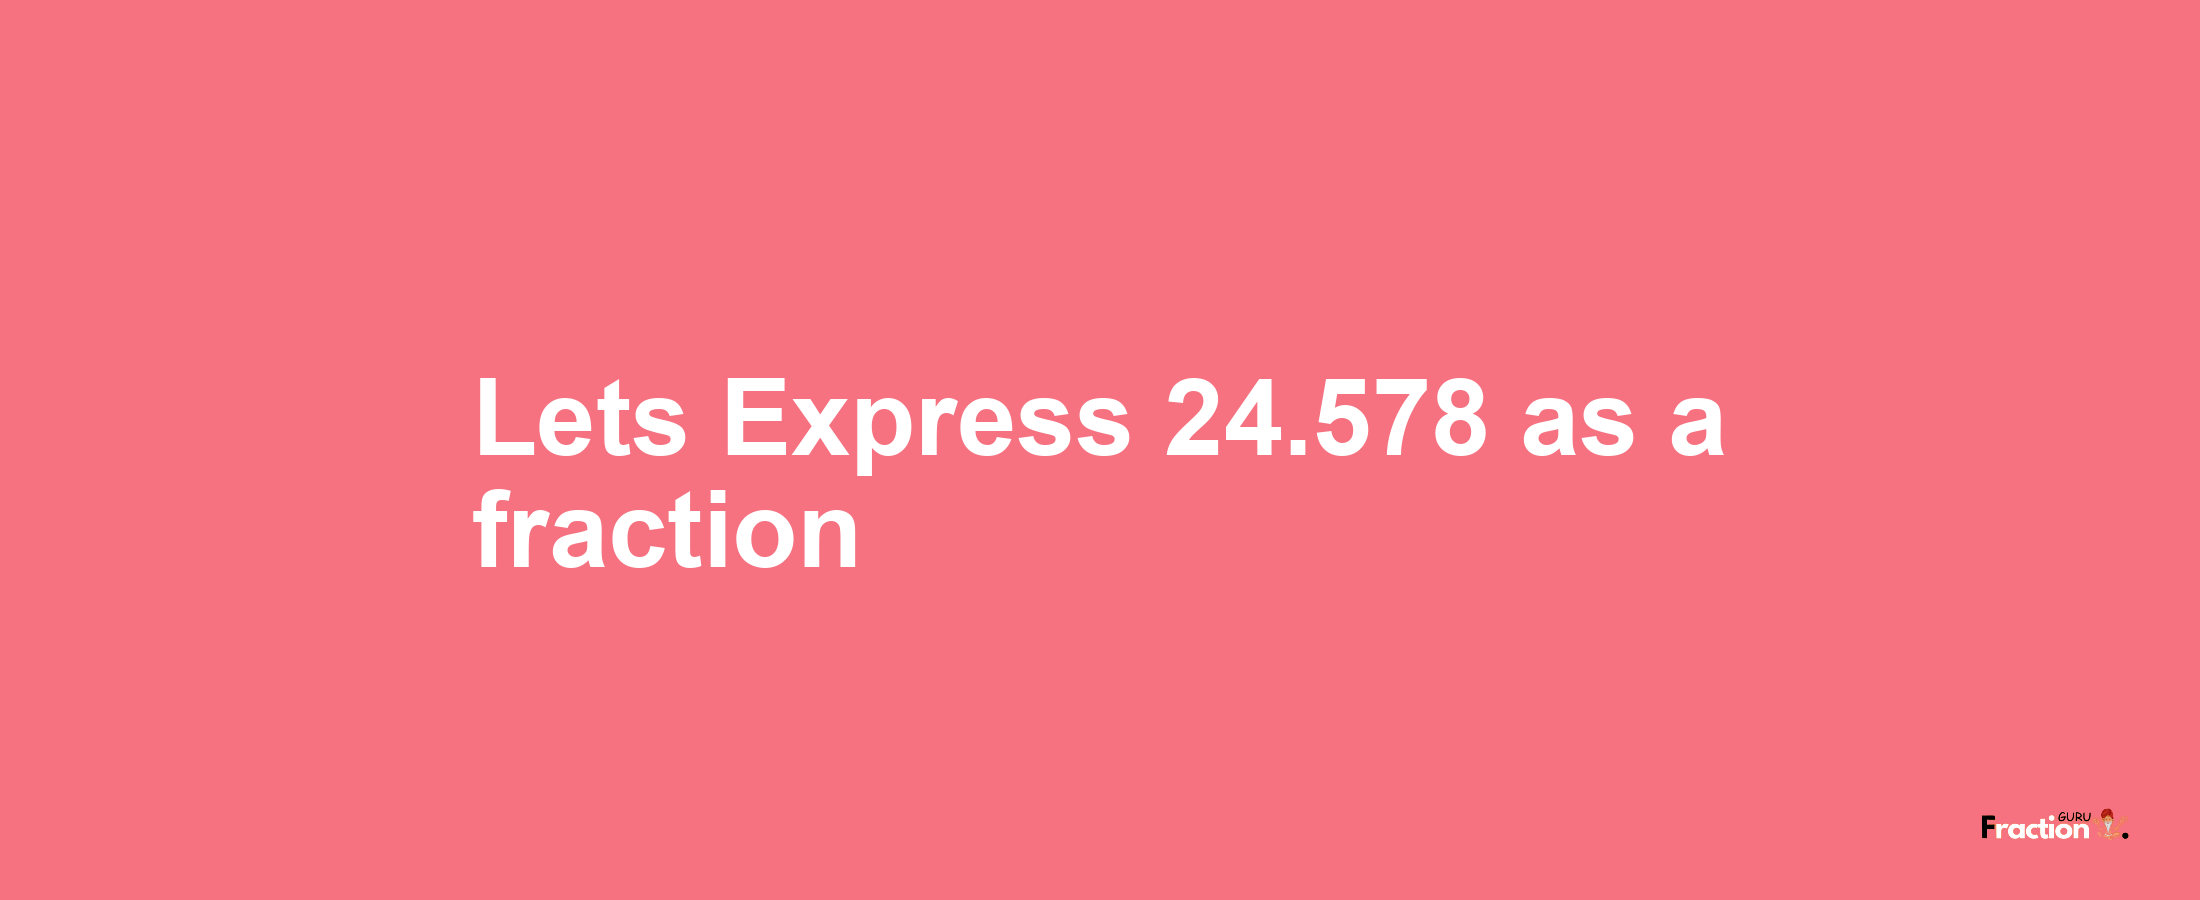 Lets Express 24.578 as afraction